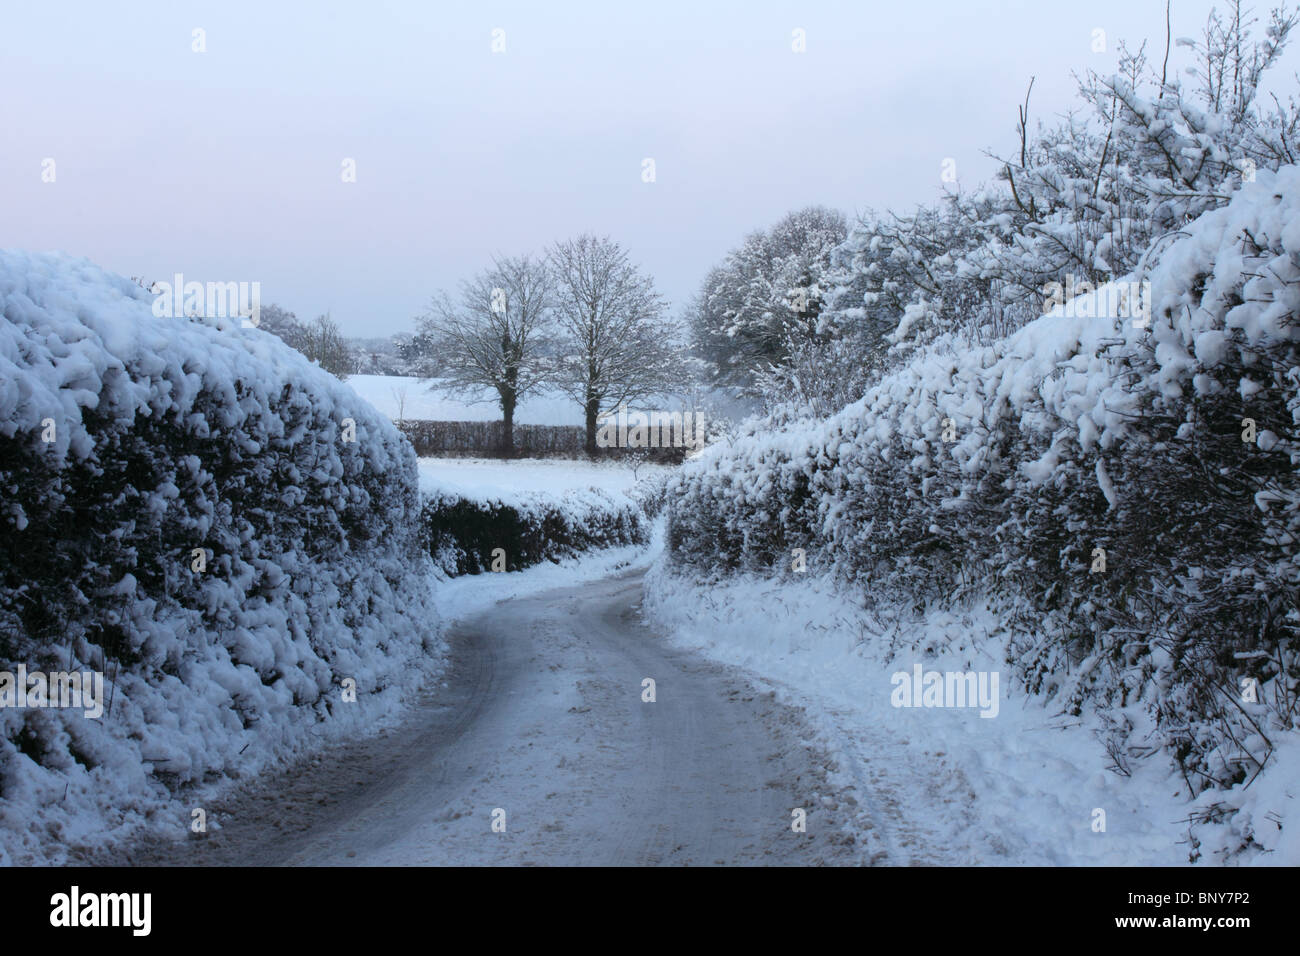 Country lane with high hedgerows, Kidmore End Lane in snow at dusk, Sonning Common, Oxfordshire, England, UK Stock Photo